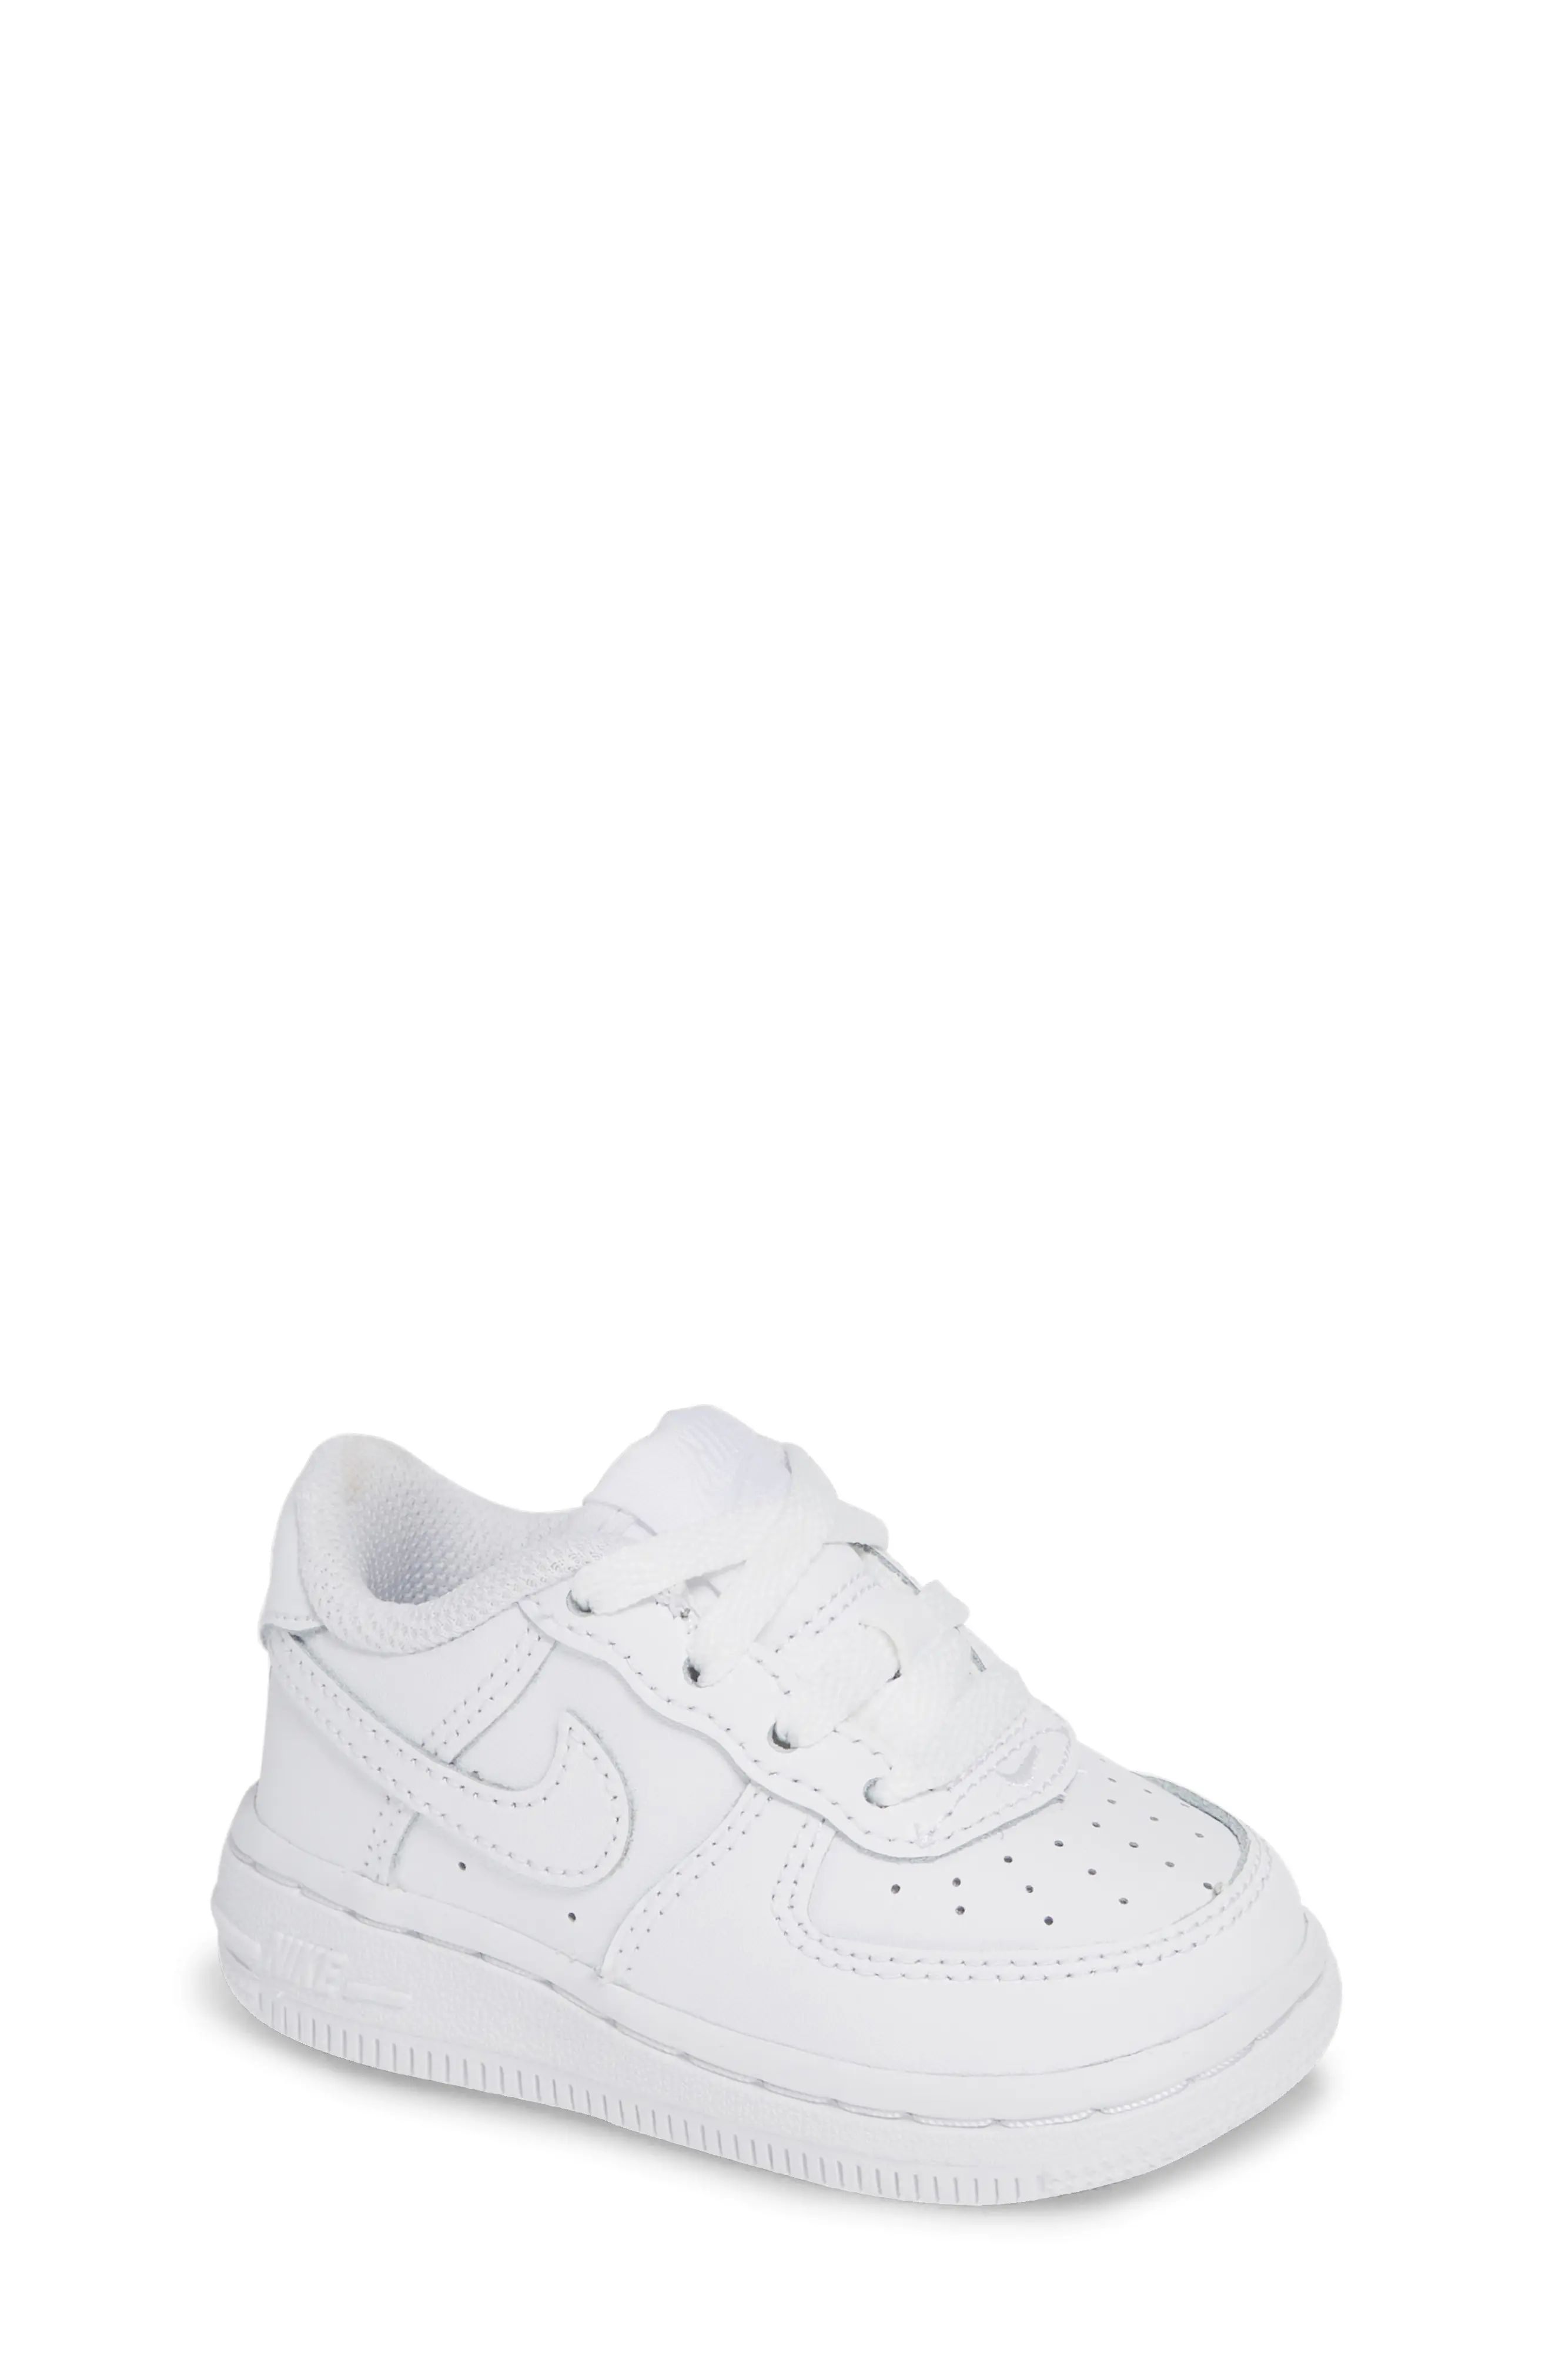 Toddler Boy's Nike Air Force 1 Sneaker, Size 9 M - White | Nordstrom